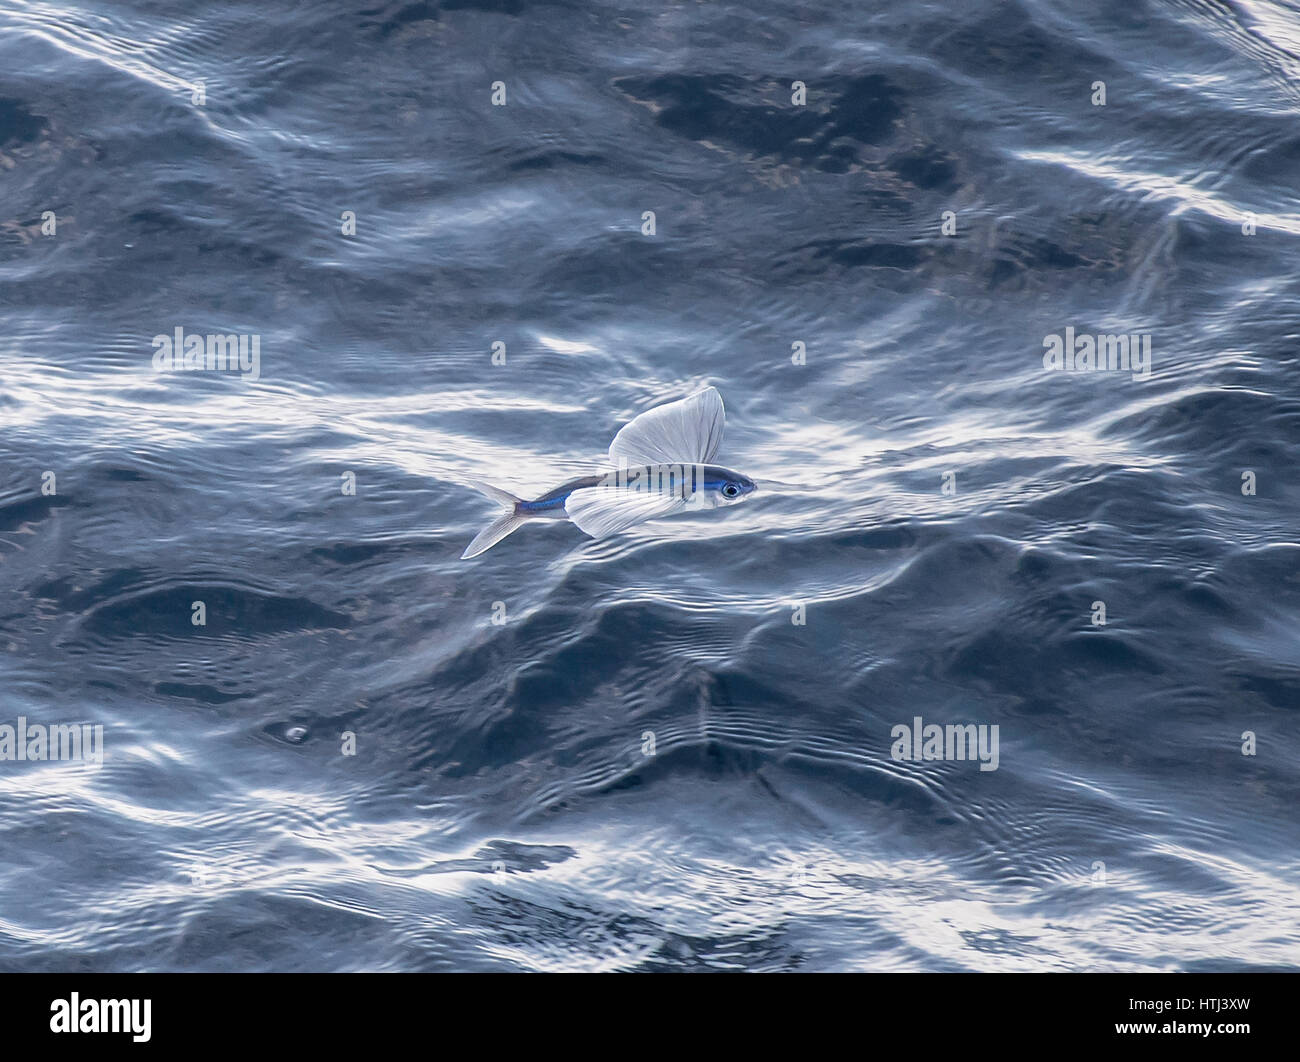 School, shoal or group of flying fish, in the air, off Mauritania, North Africa, North Atlantic Ocean Stock Photo